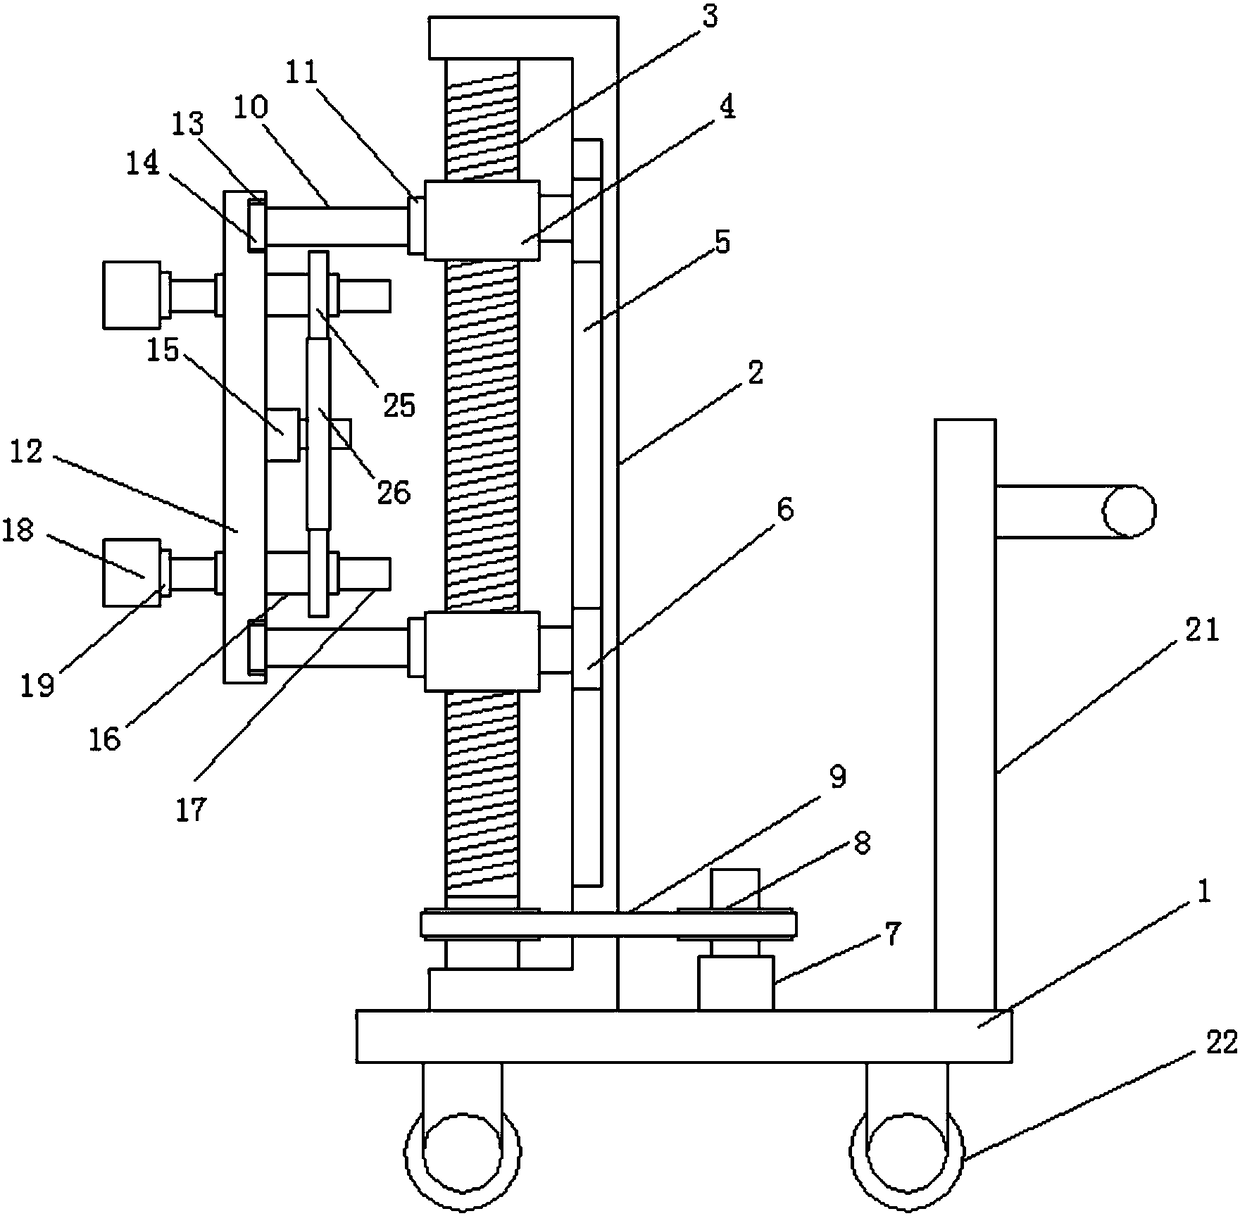 Multi-fixing-bolt screwing device used for detaching automobile tire